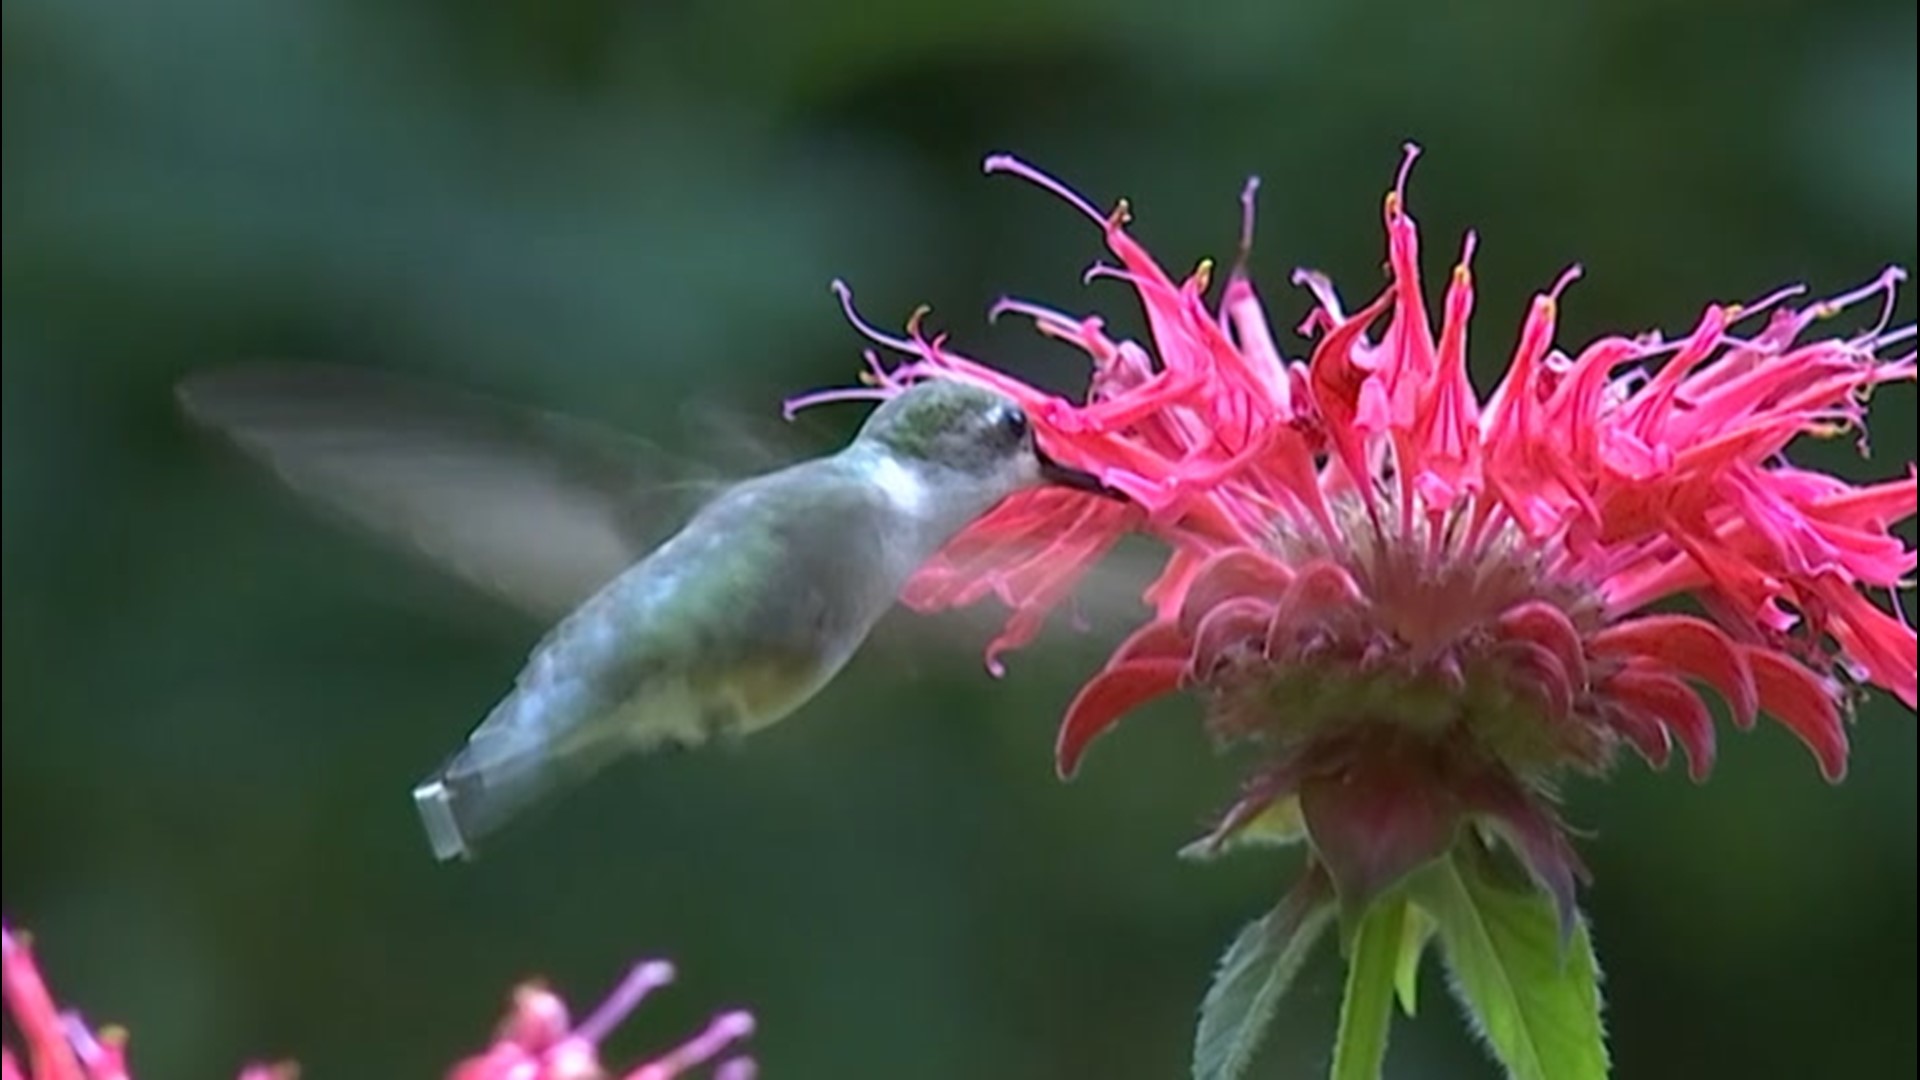 They're as light as a feather and swift like the wind, buzzing northward for the annual breeding season. Blake Naftel takes us on the flight of the hummingbird.